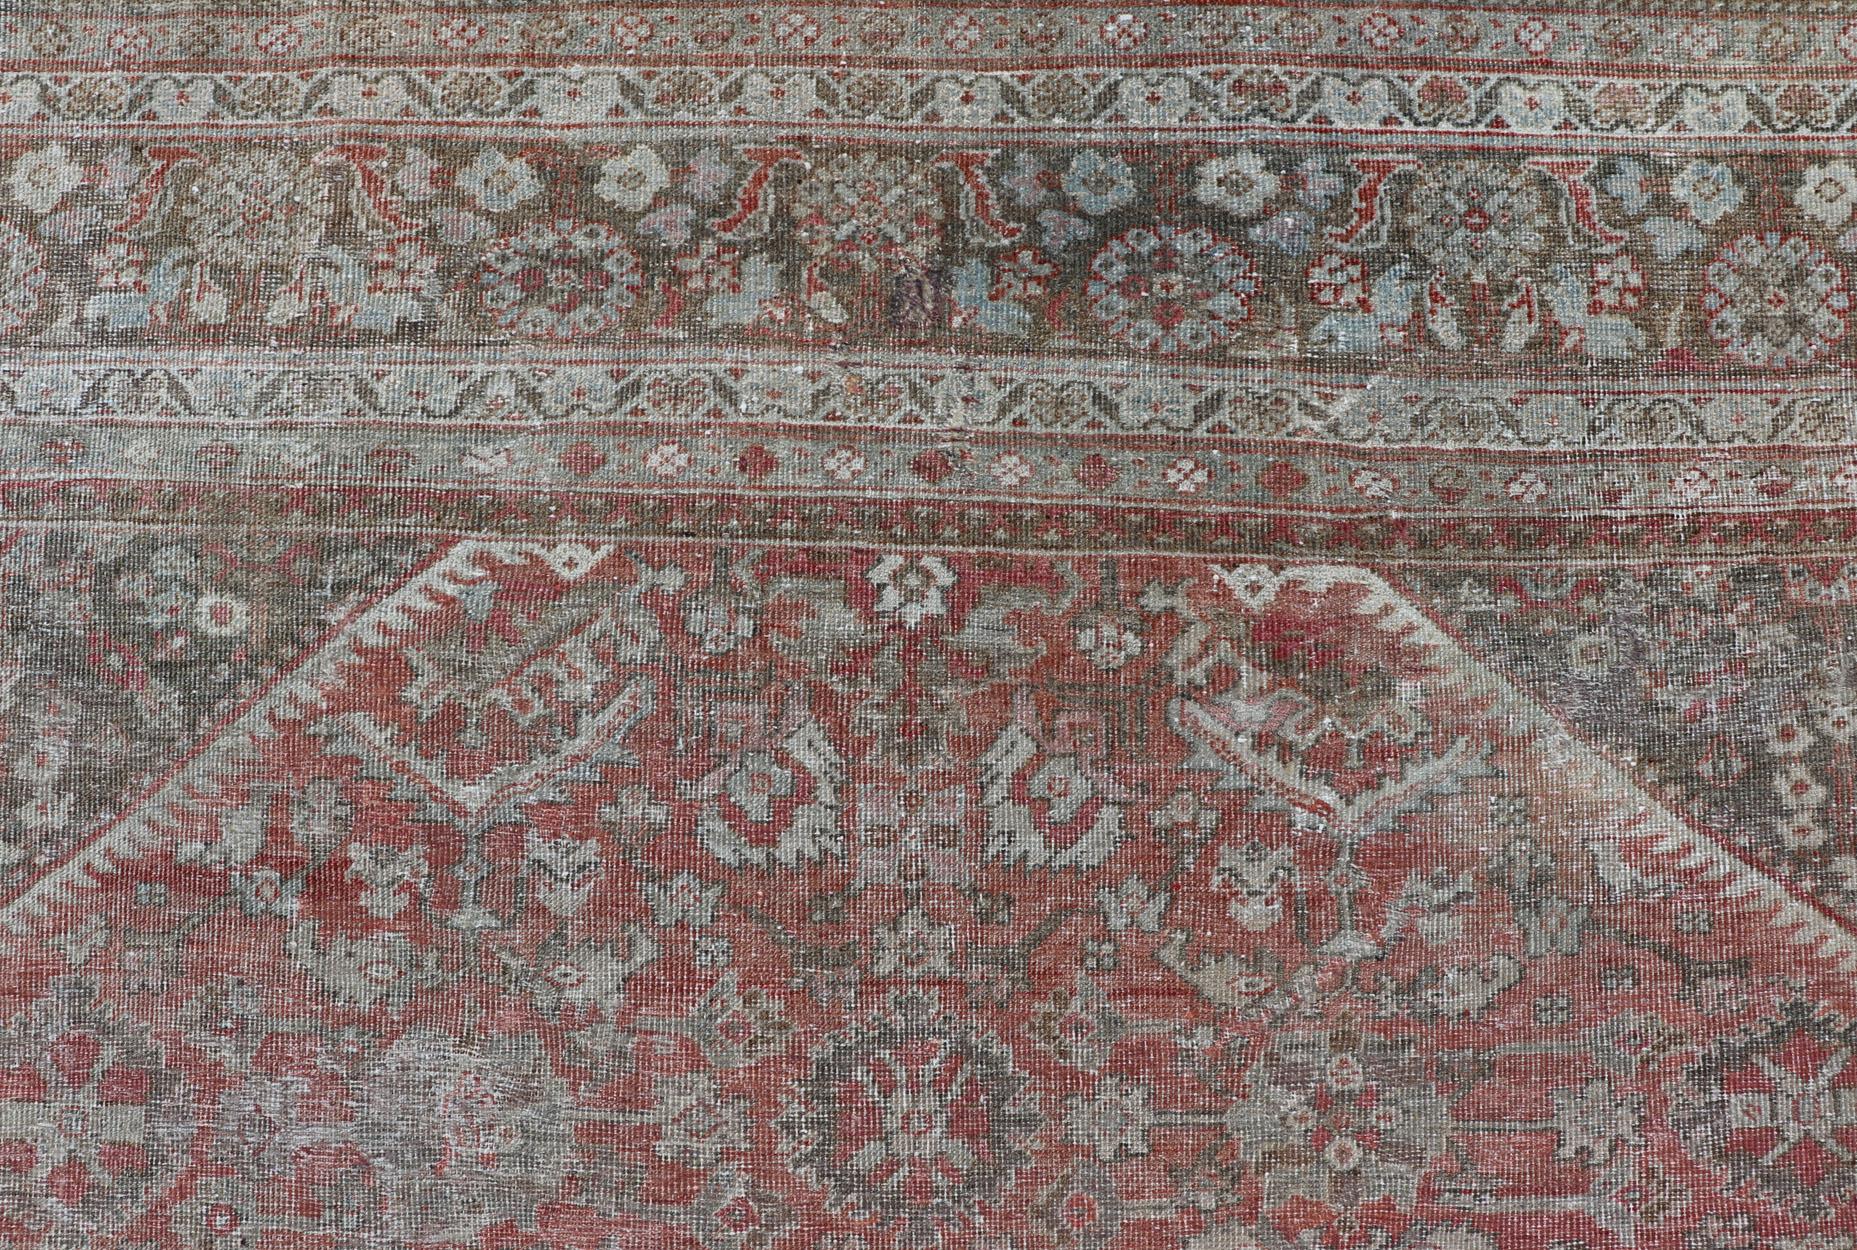 Wool Distressed Antique Sultanabad Rug in Faded Red Background, Charcoal Border For Sale